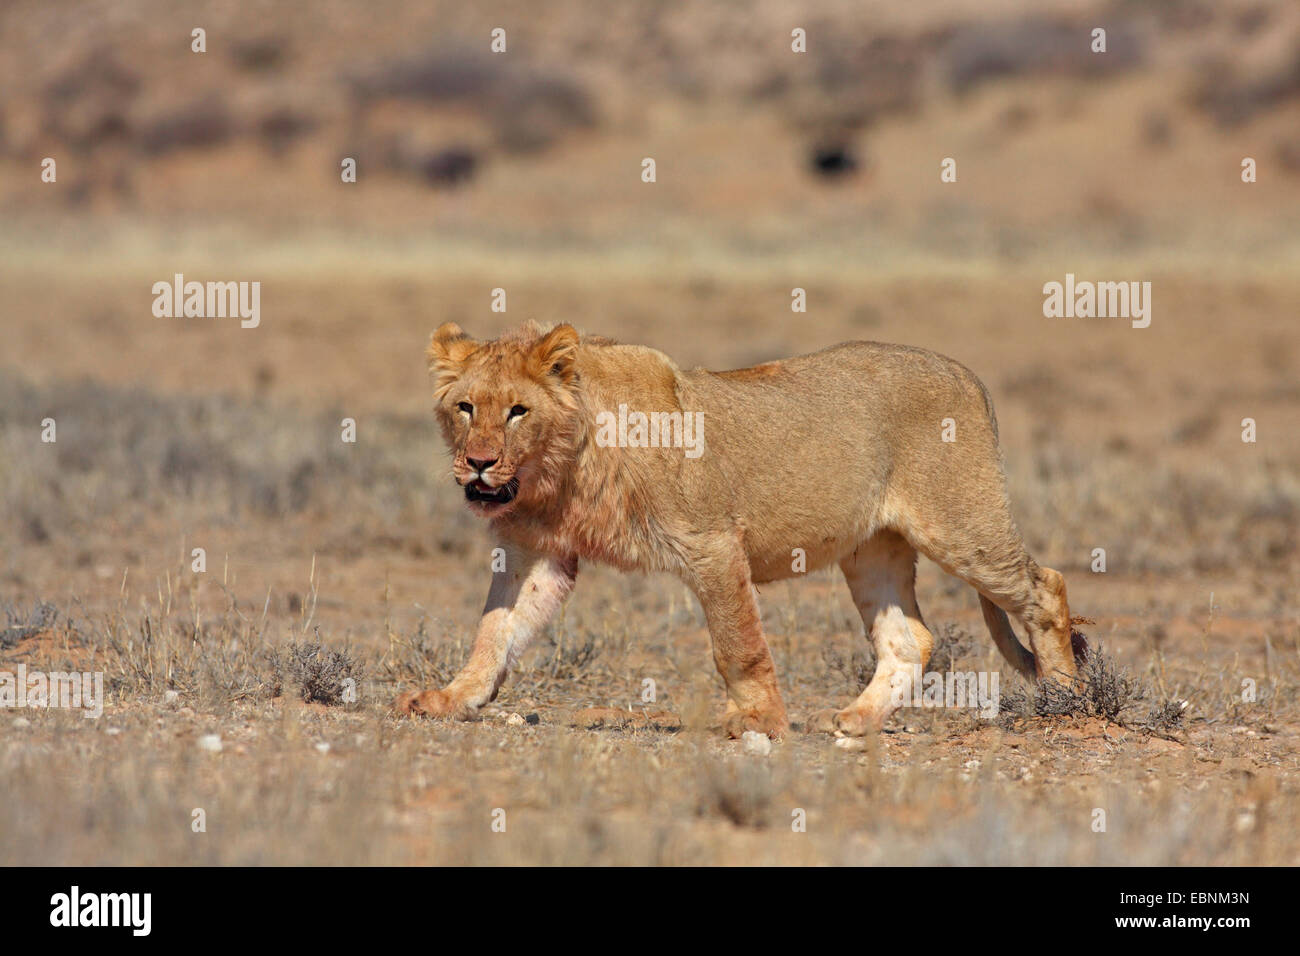 lion (Panthera leo), young male in a semi-desert, South Africa, Kgalagadi Transfrontier National Park Stock Photo